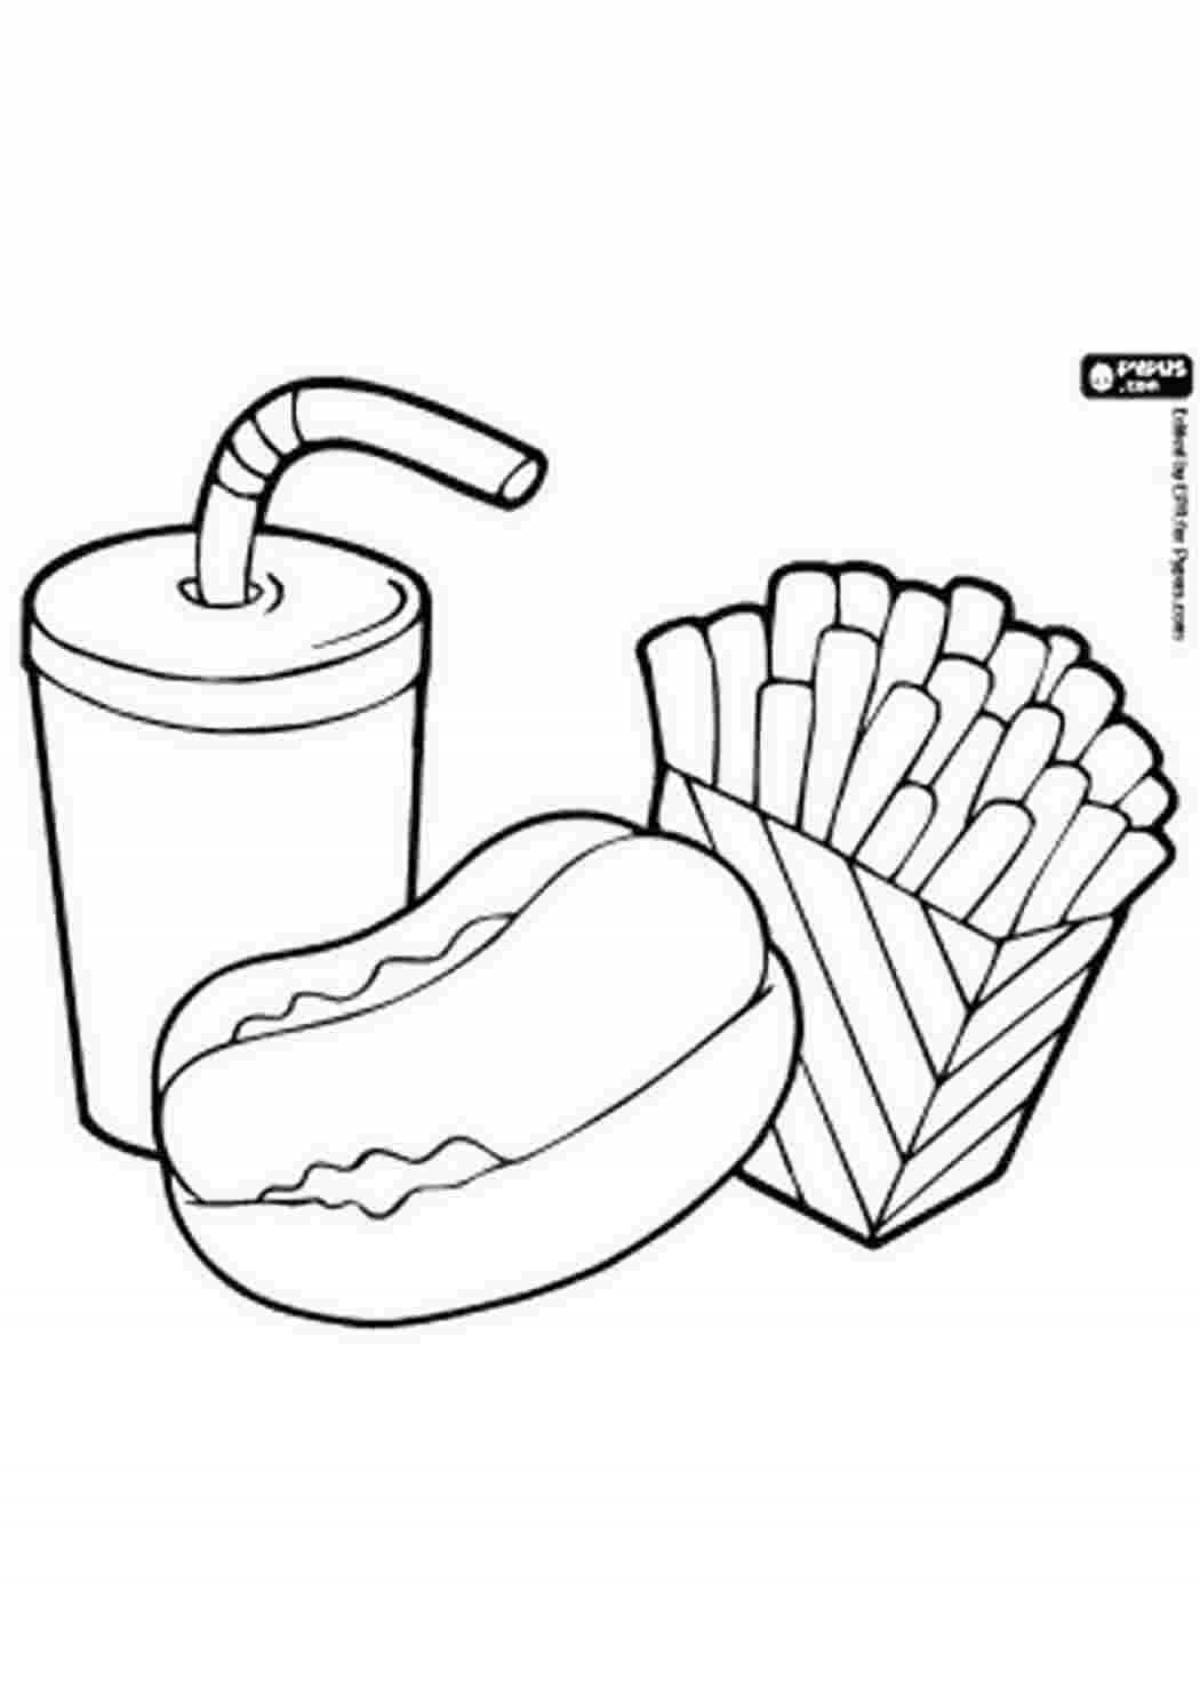 Tempting mcdonald's food coloring page